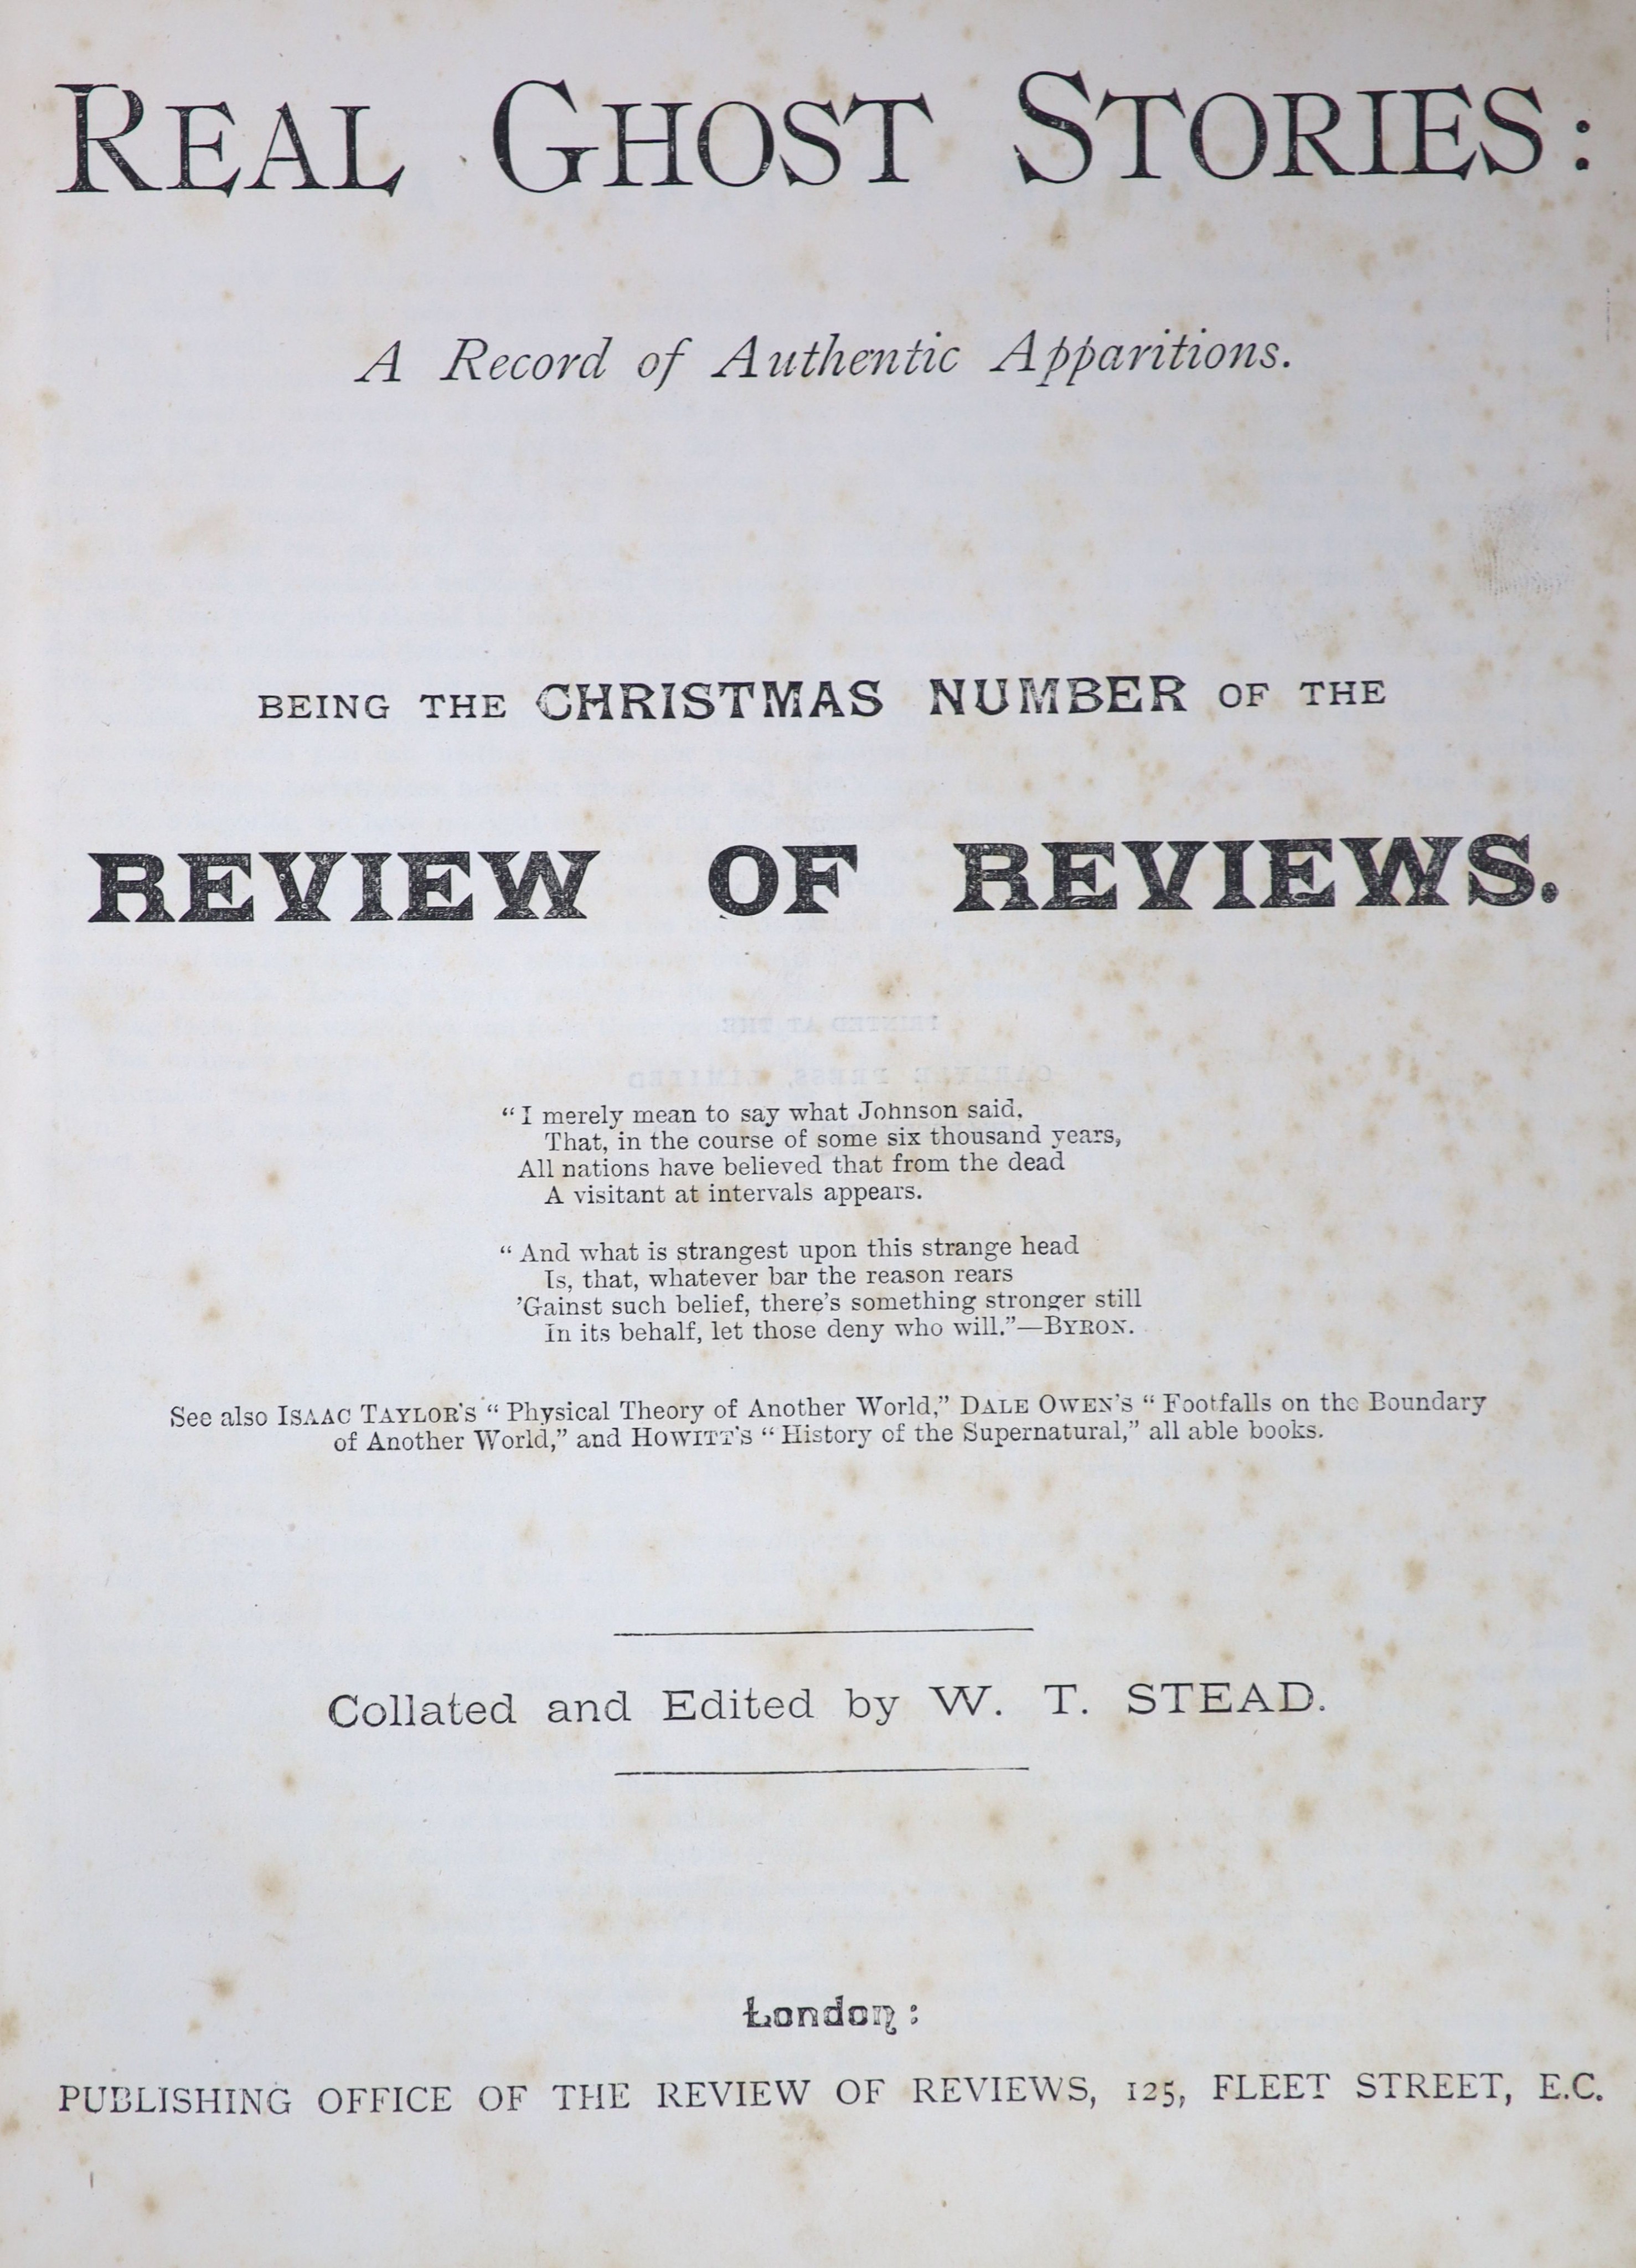 Stead, William. Thomas (editor) - Real Ghost Stories: A Record of Authentic Apparitions. Being the Christmas Number of the Review of Reviews, 5 works in 1, 1st editions, qto, red cloth, boards faded and scuffed, endpaper